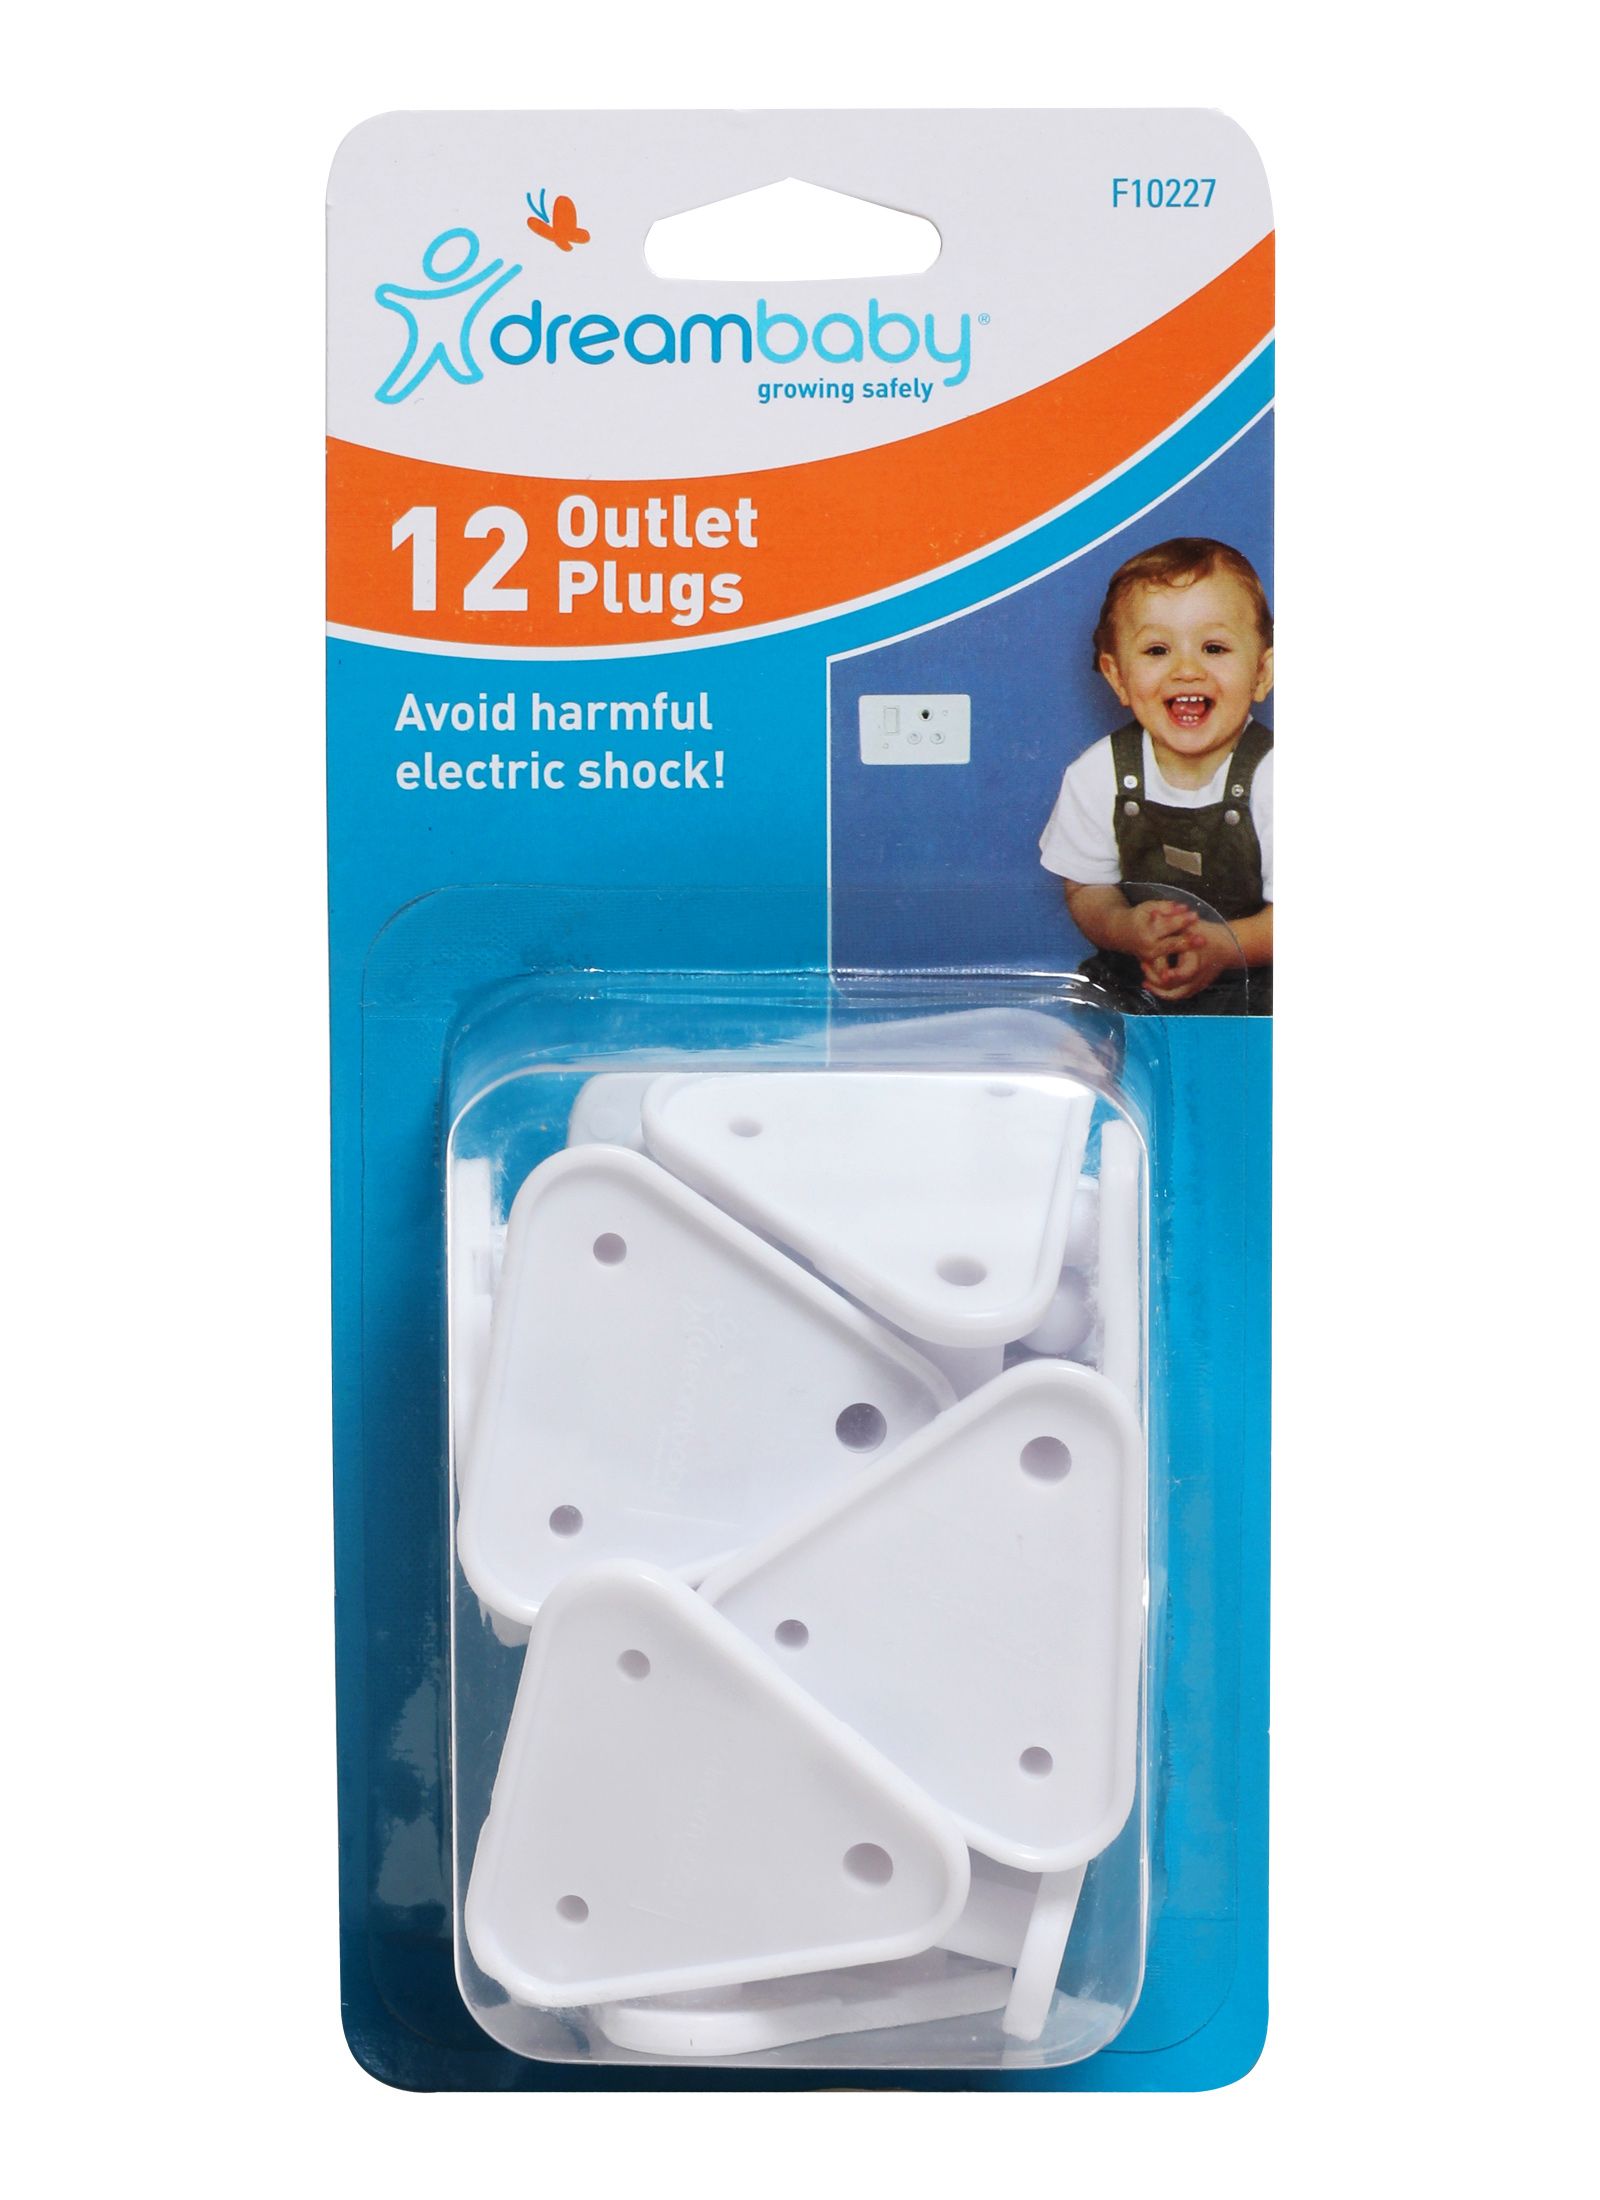 Dreambaby - 12 Outlet Plugs